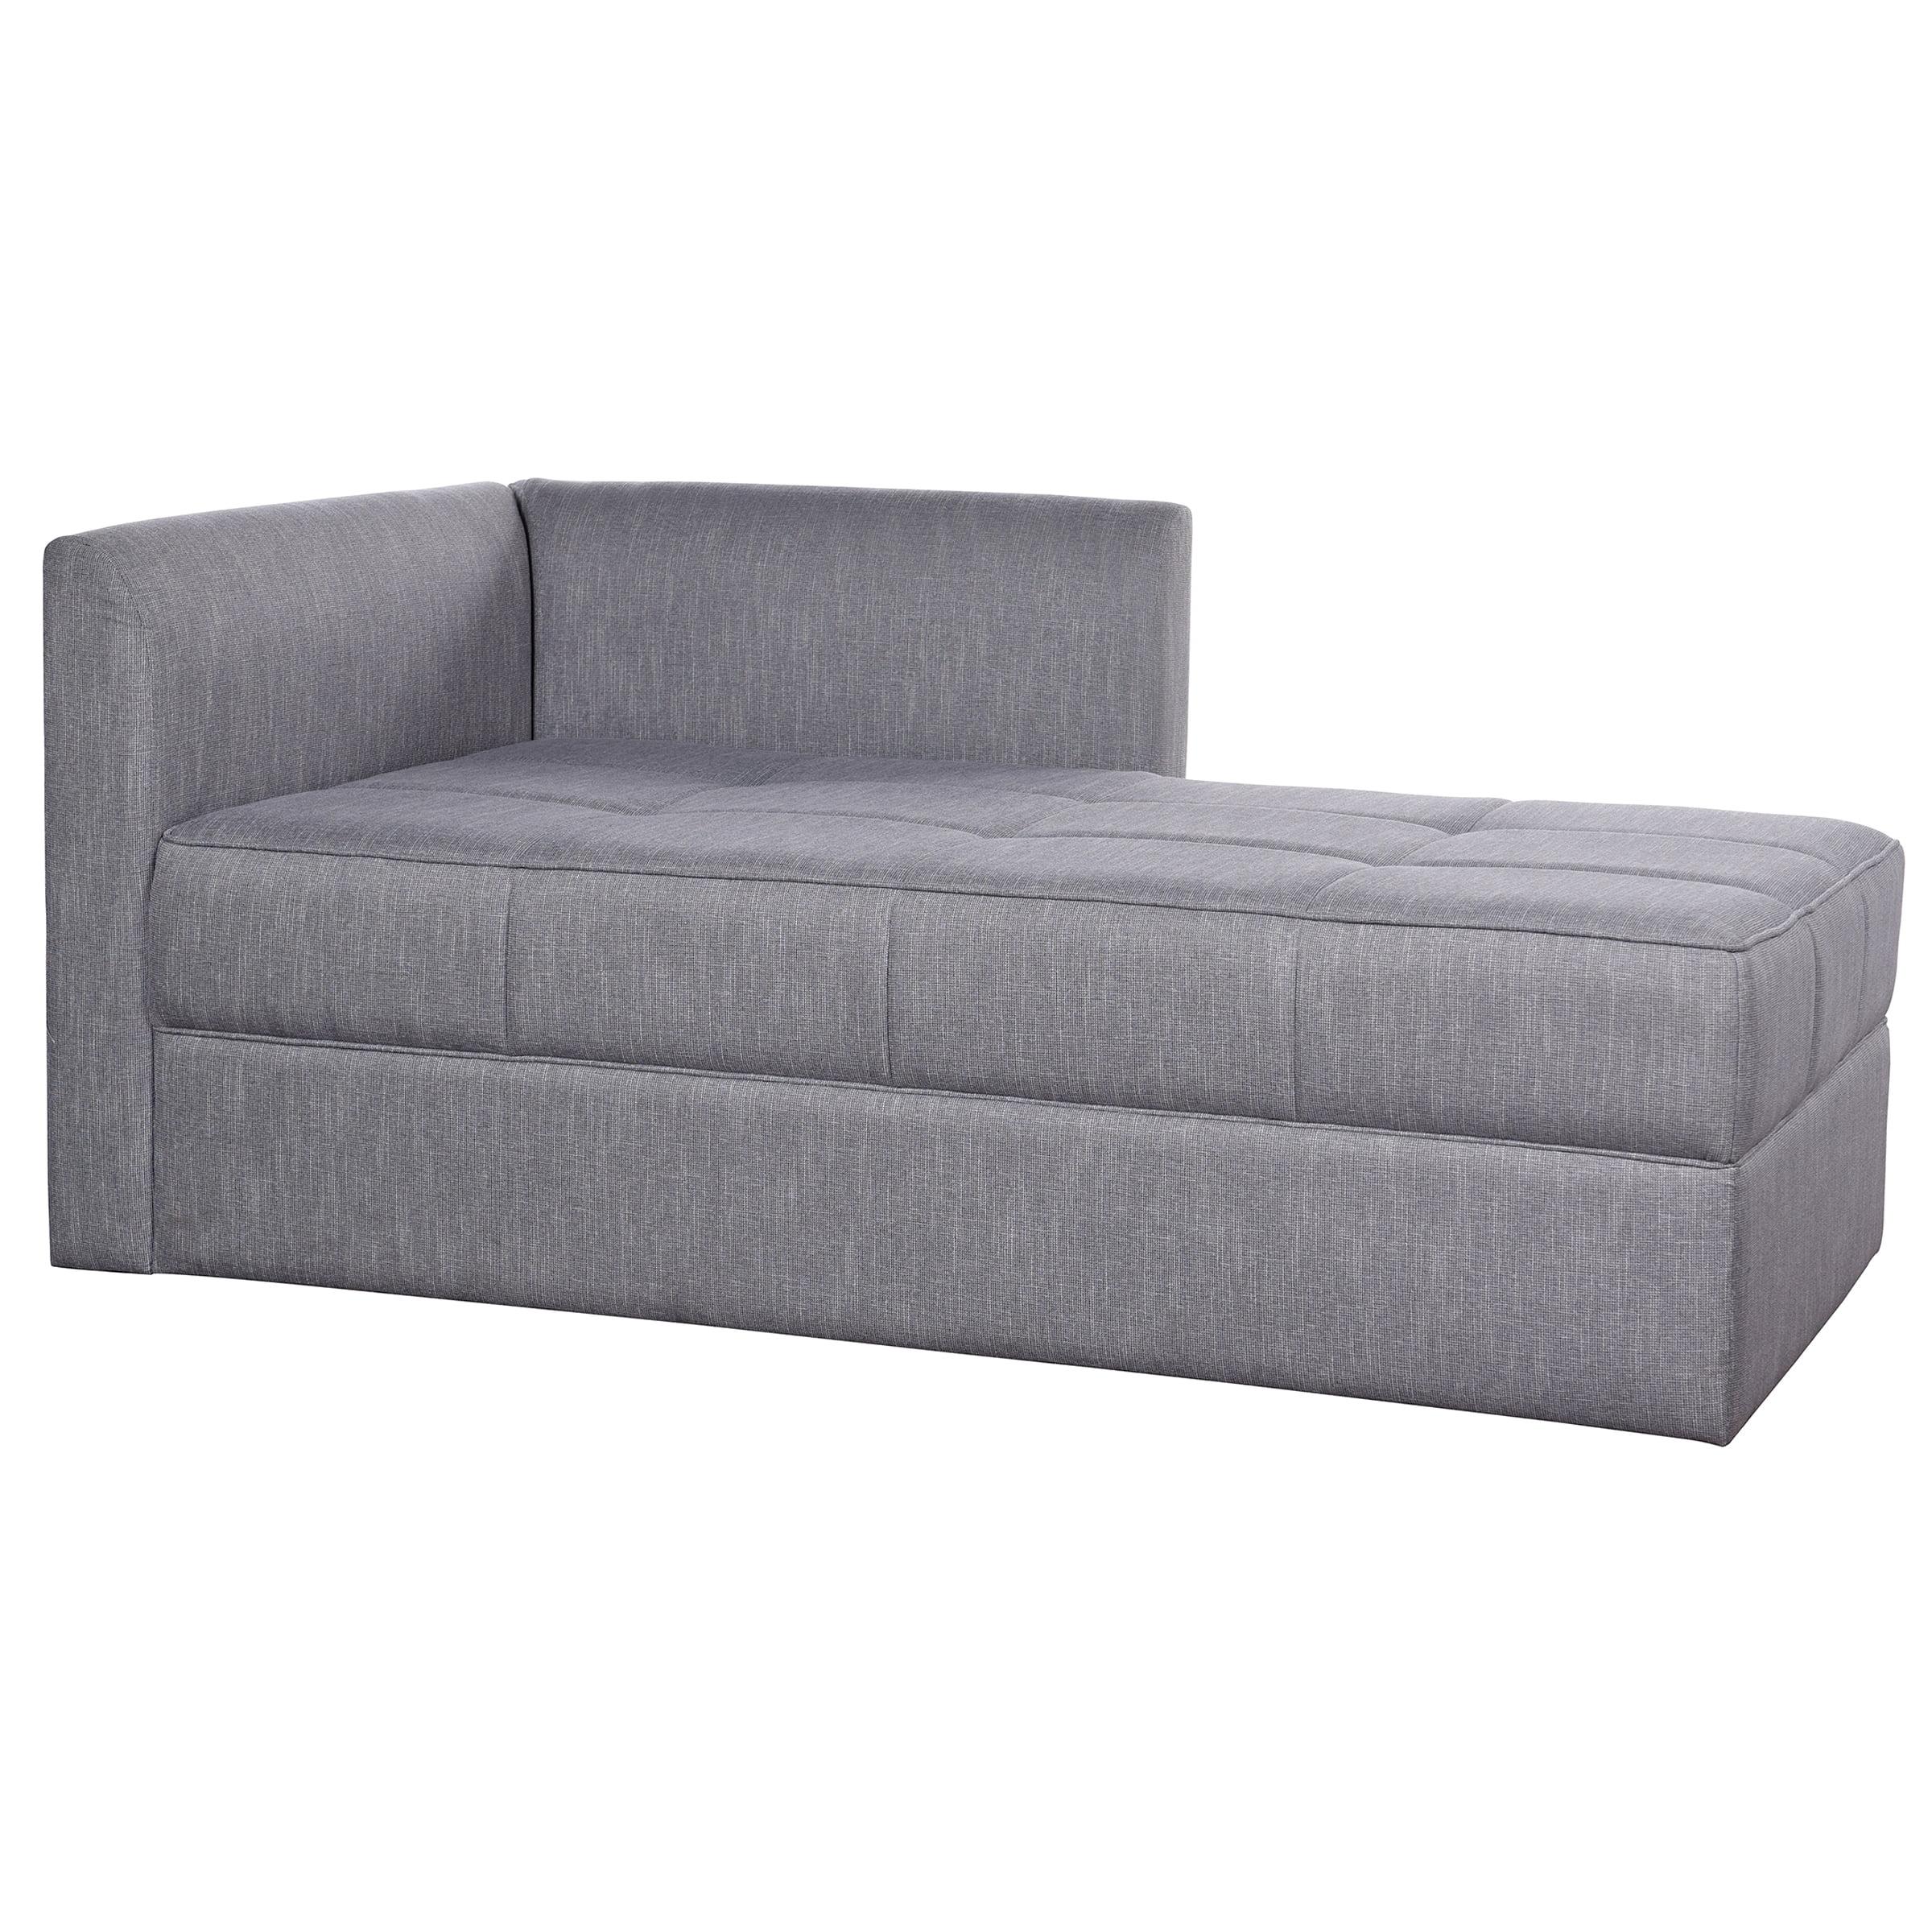 Quilted Comfort Gray Linen 65" Chaise Lounger